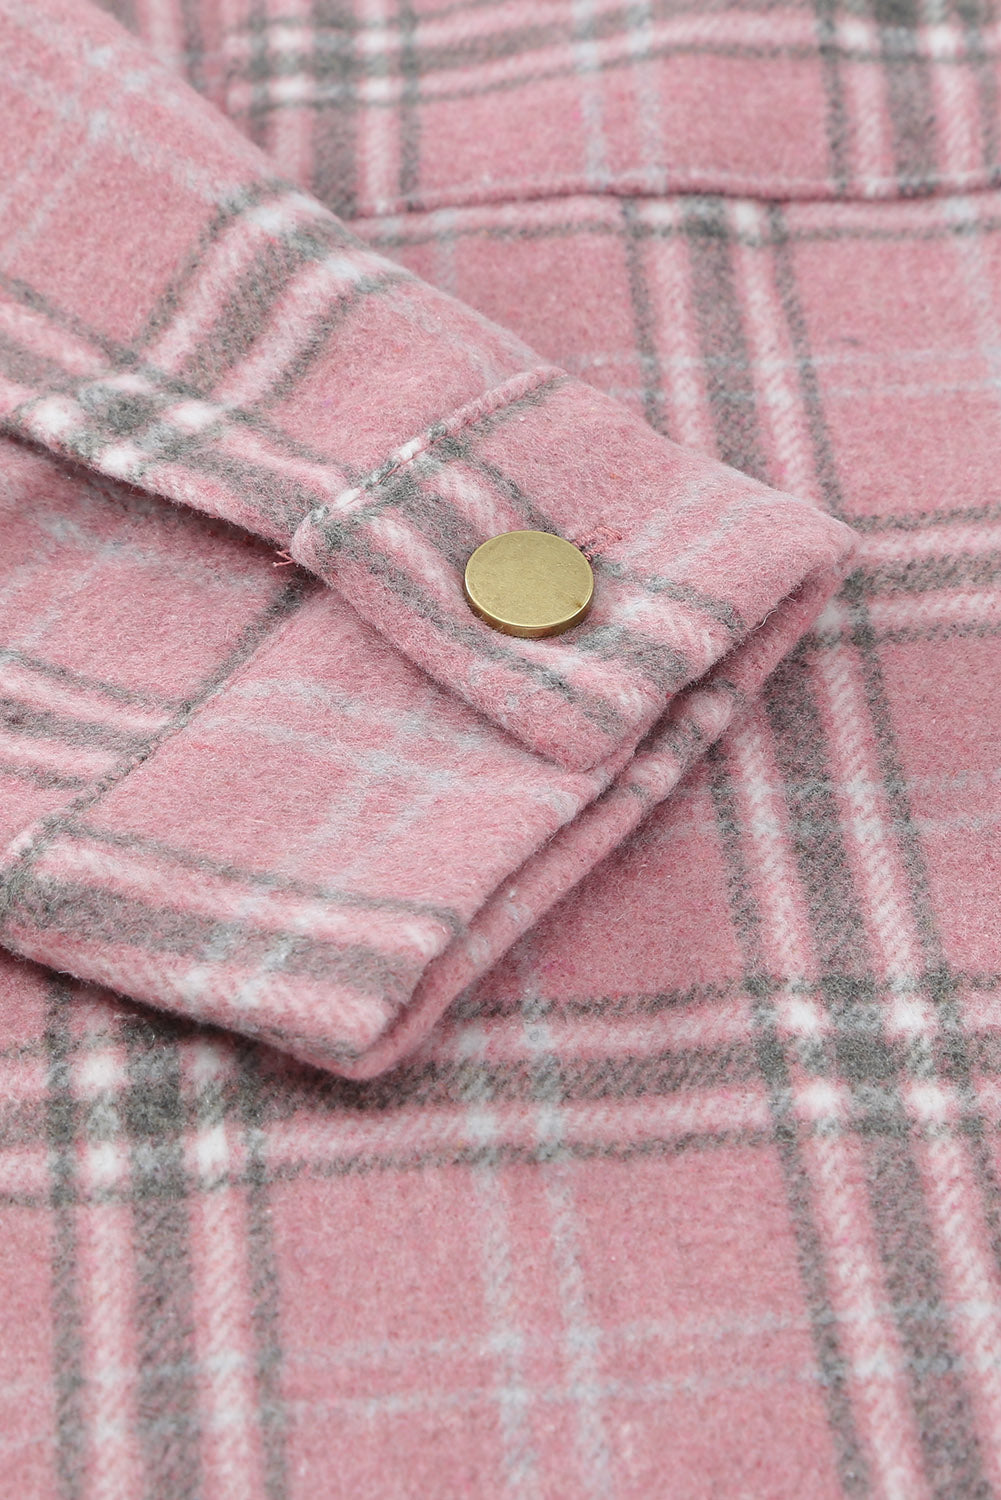 Pink, Black, or Khaki Plaid Casual Button Up Flannel Shirt with Slits